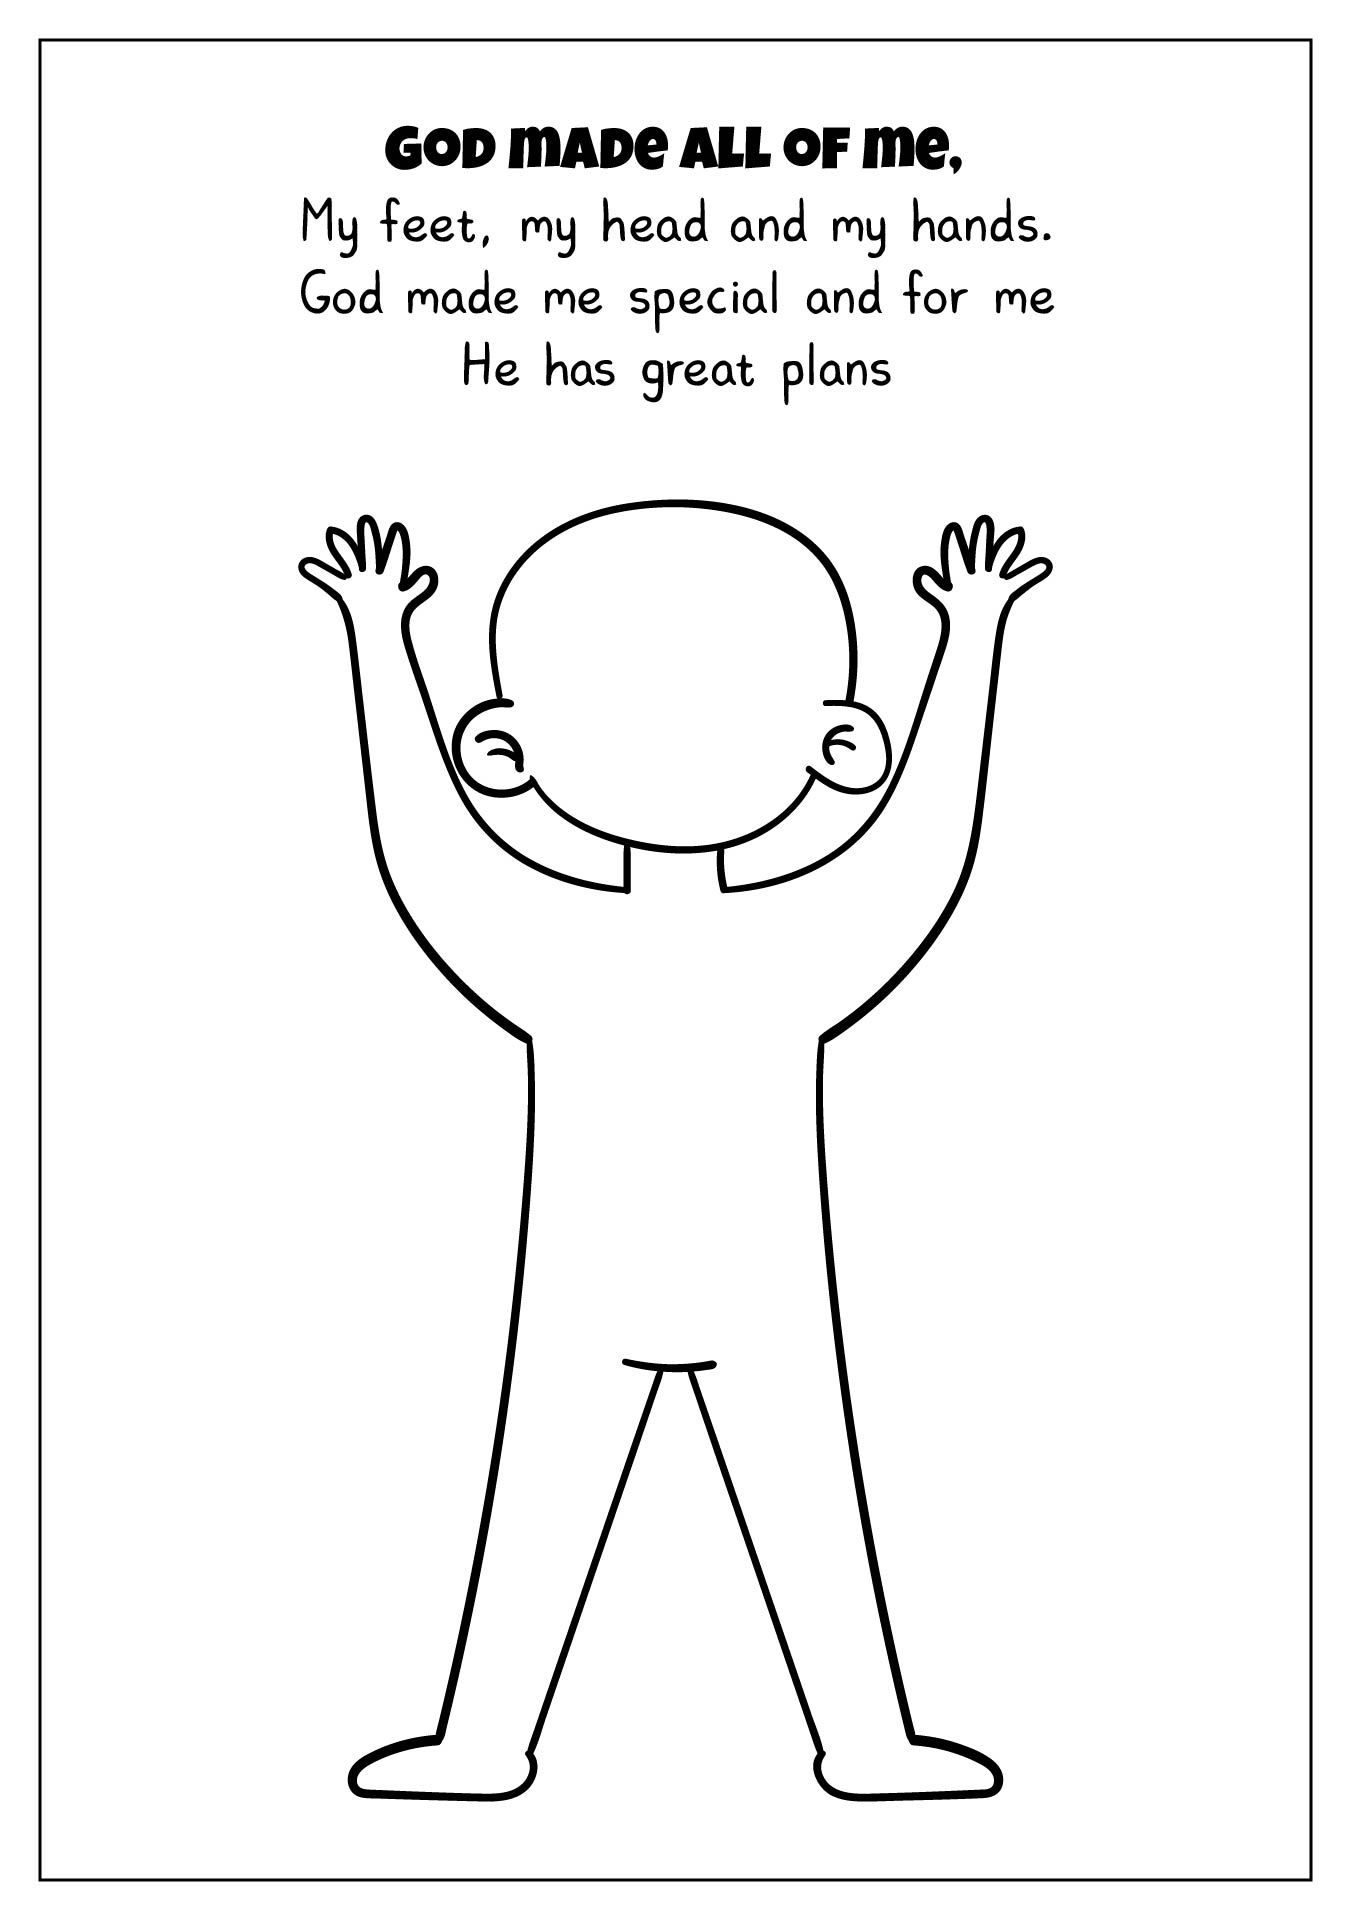 20 Best God Made Me Special Coloring Pages Printables PDF For Free At Printablee Bible Lessons For Kids Preschool Bible Lessons God Made Me